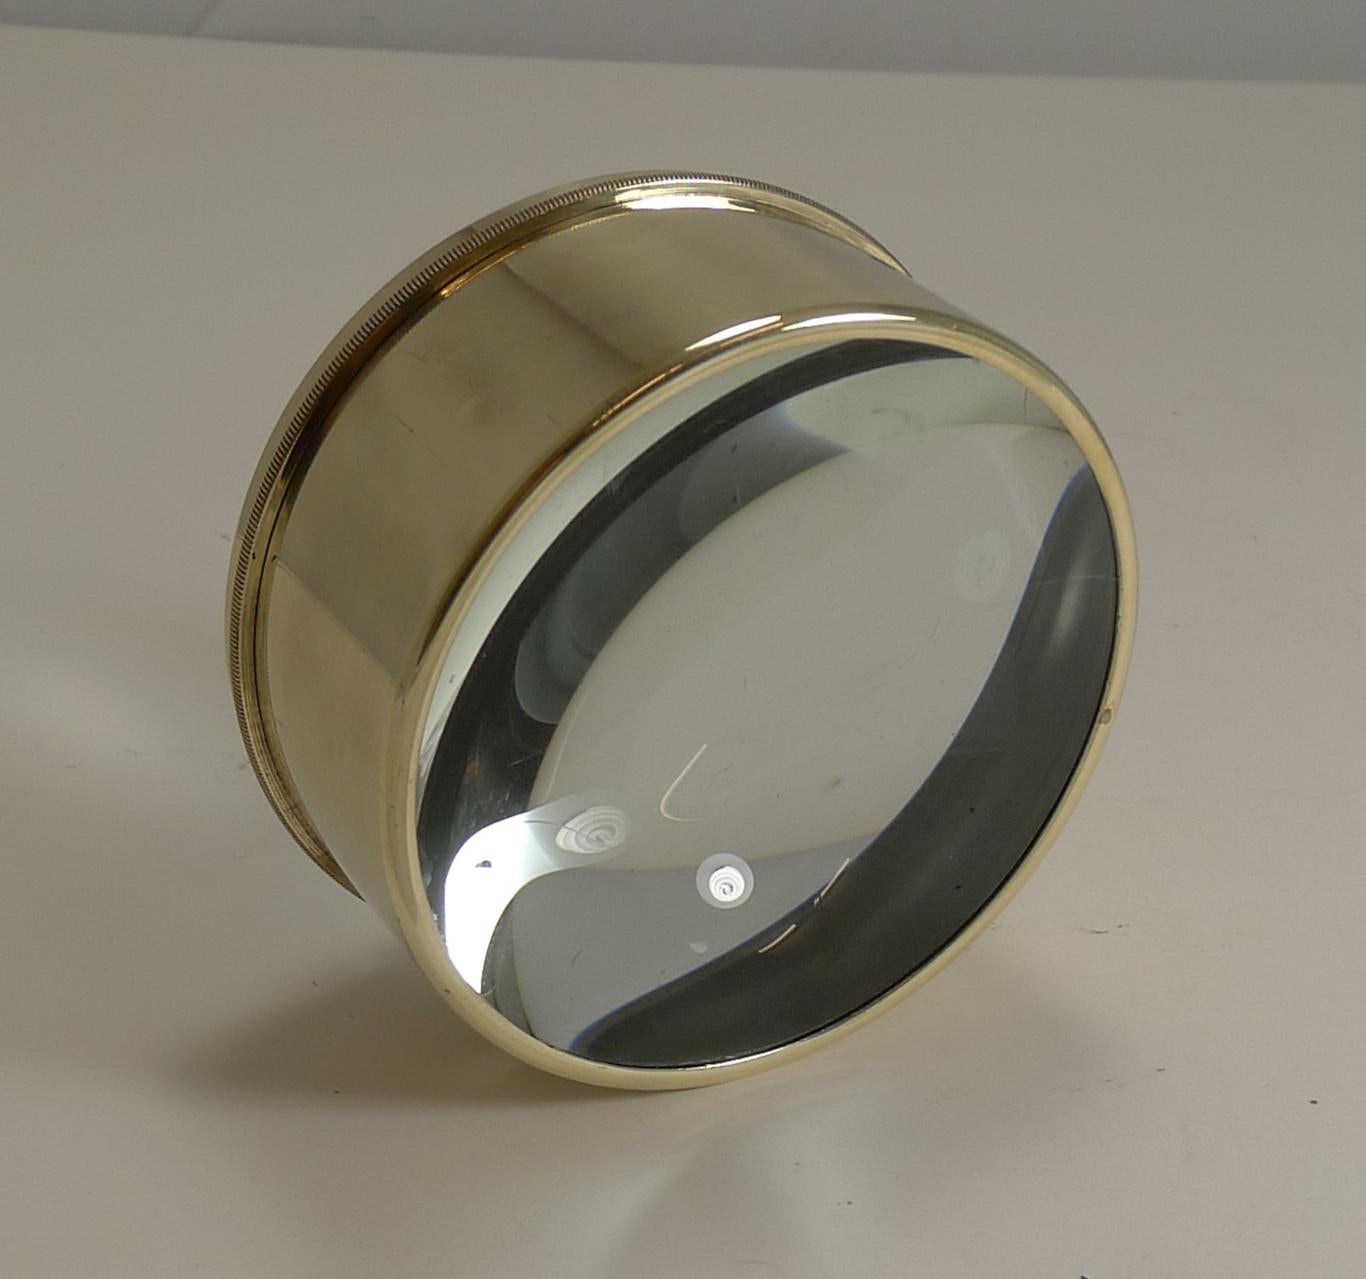 Always very popular and a very useful desk-top accessory. These large circular magnifiers actually are the condenser or magnifier from a Magic Lantern dating to circa 1910; they are rescued, polished up and put back to use in the modern day.

This